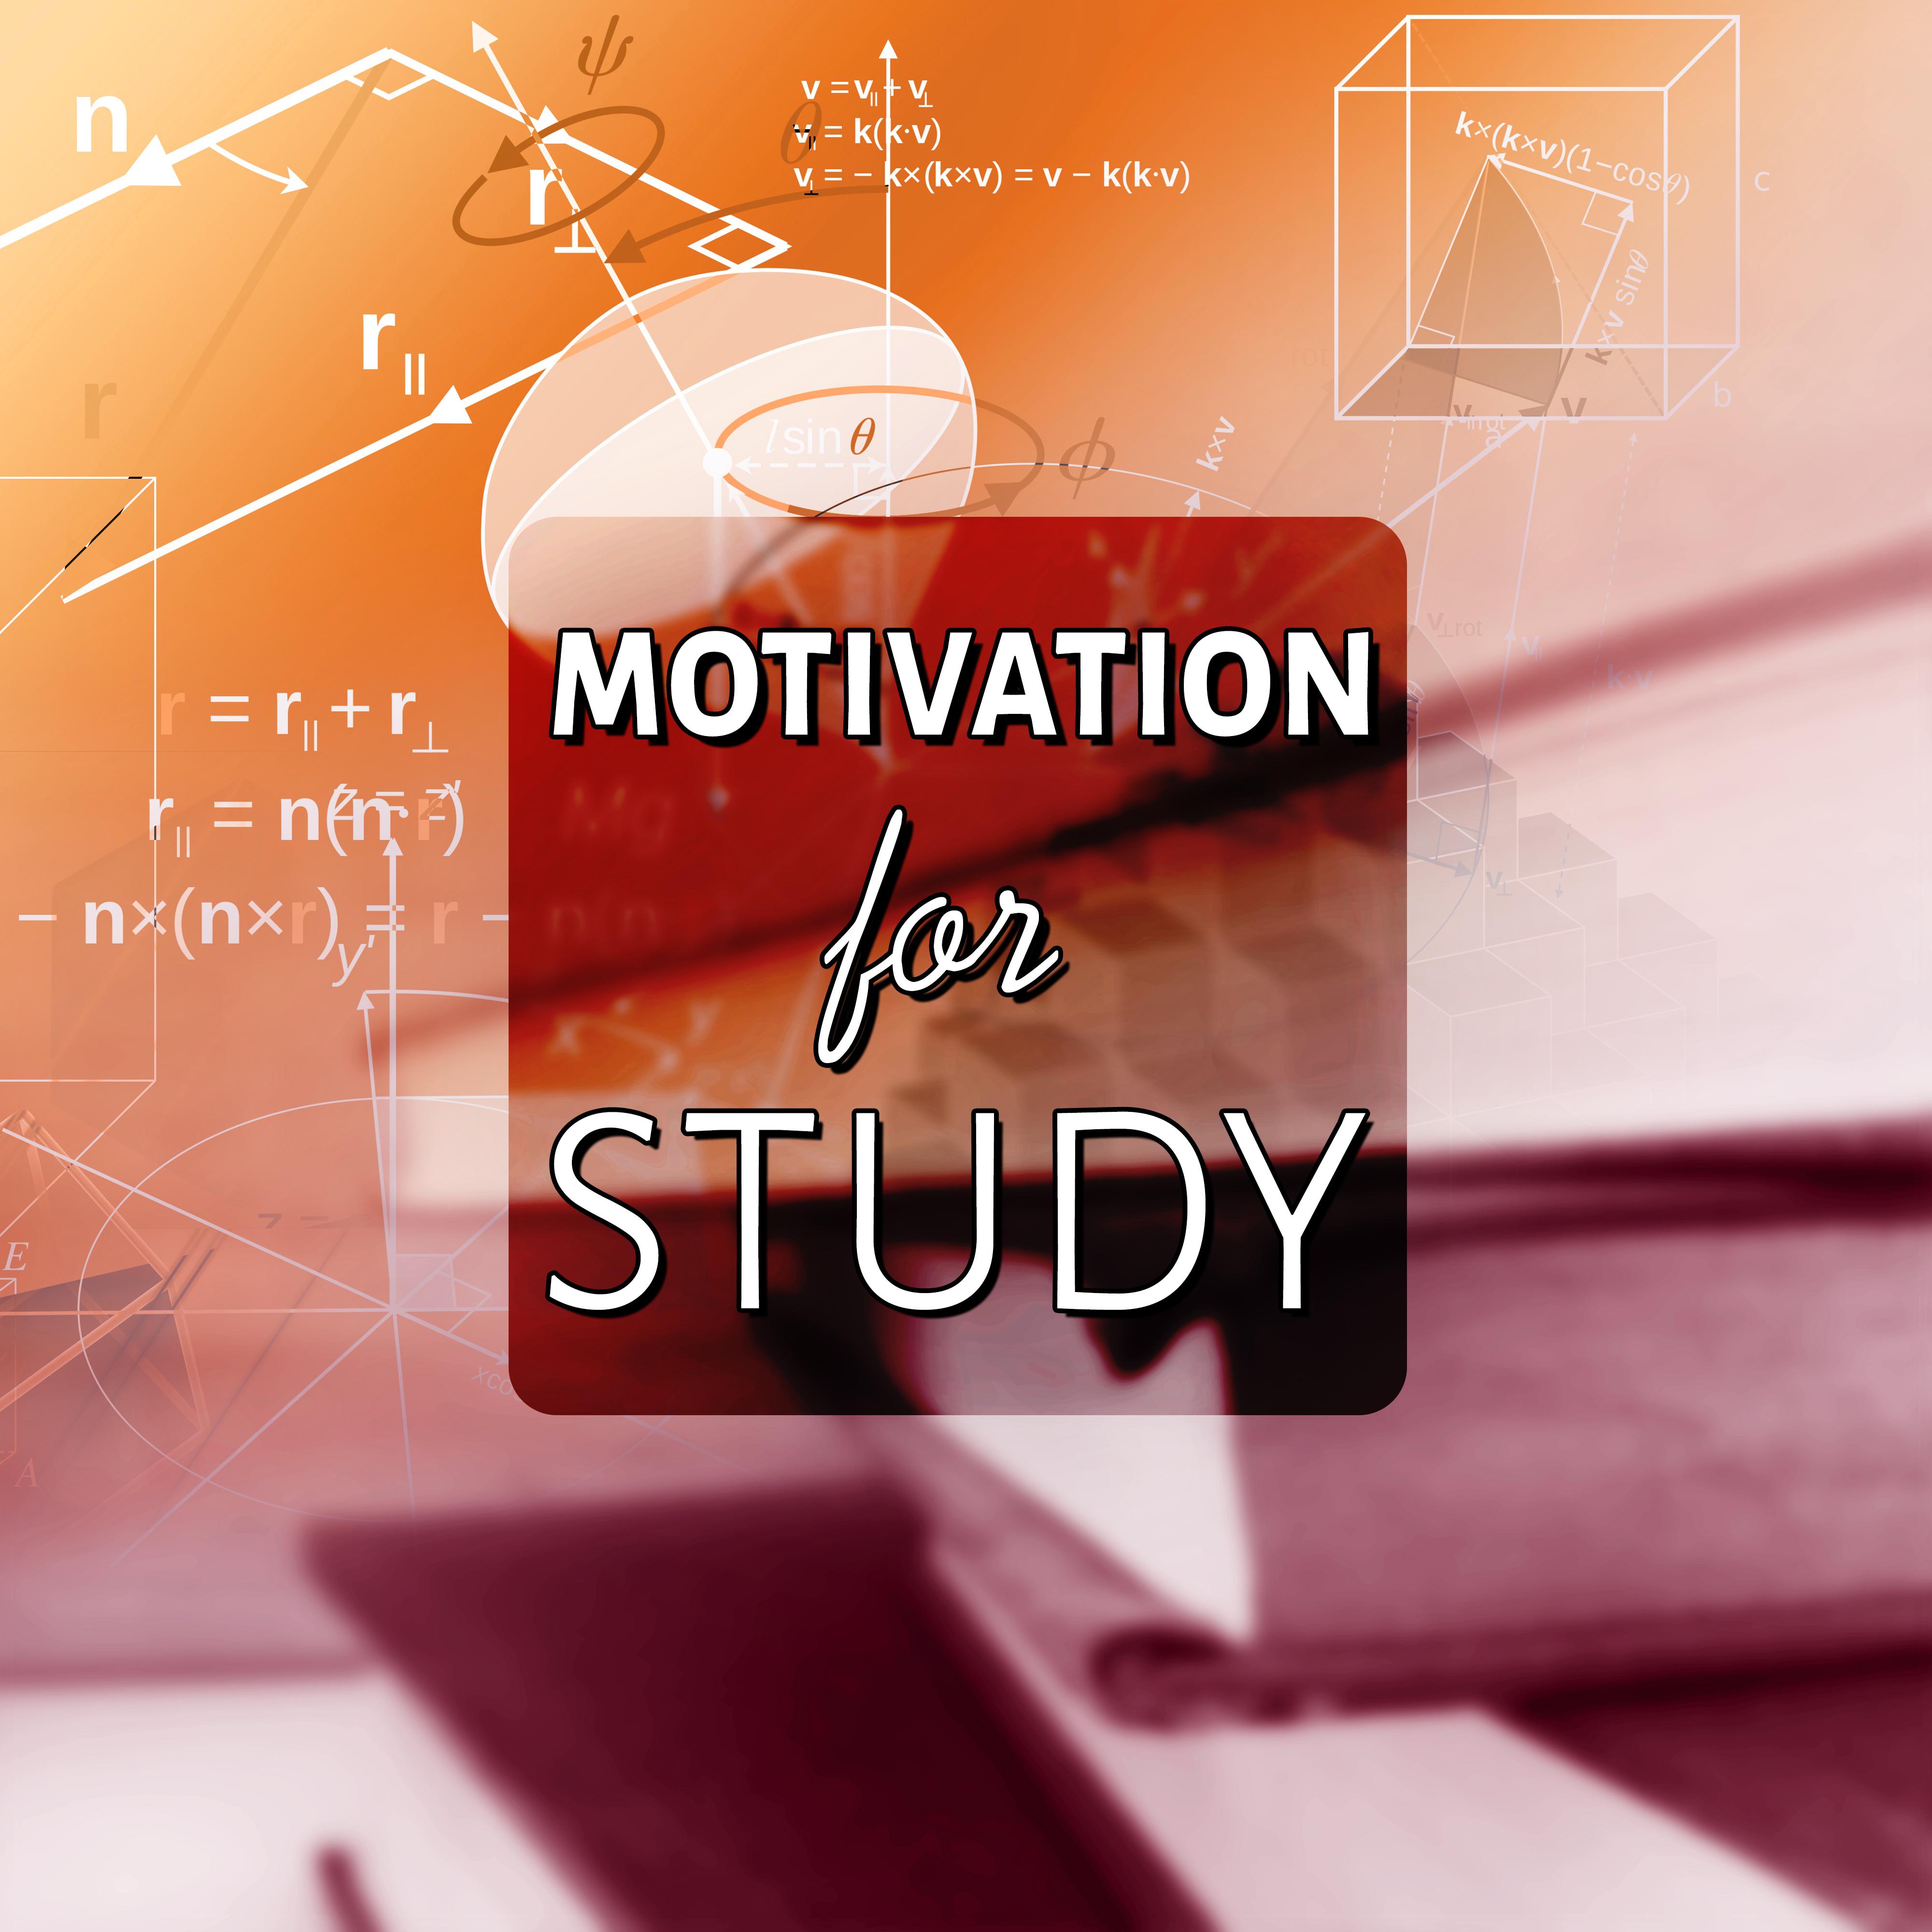 Motivation for Study  Background Music for Learning, Study Skills, Brain Exercises, Increase Concentration, Improve Memory, Nature Sounds, Peace of Mind, Creative Thinking